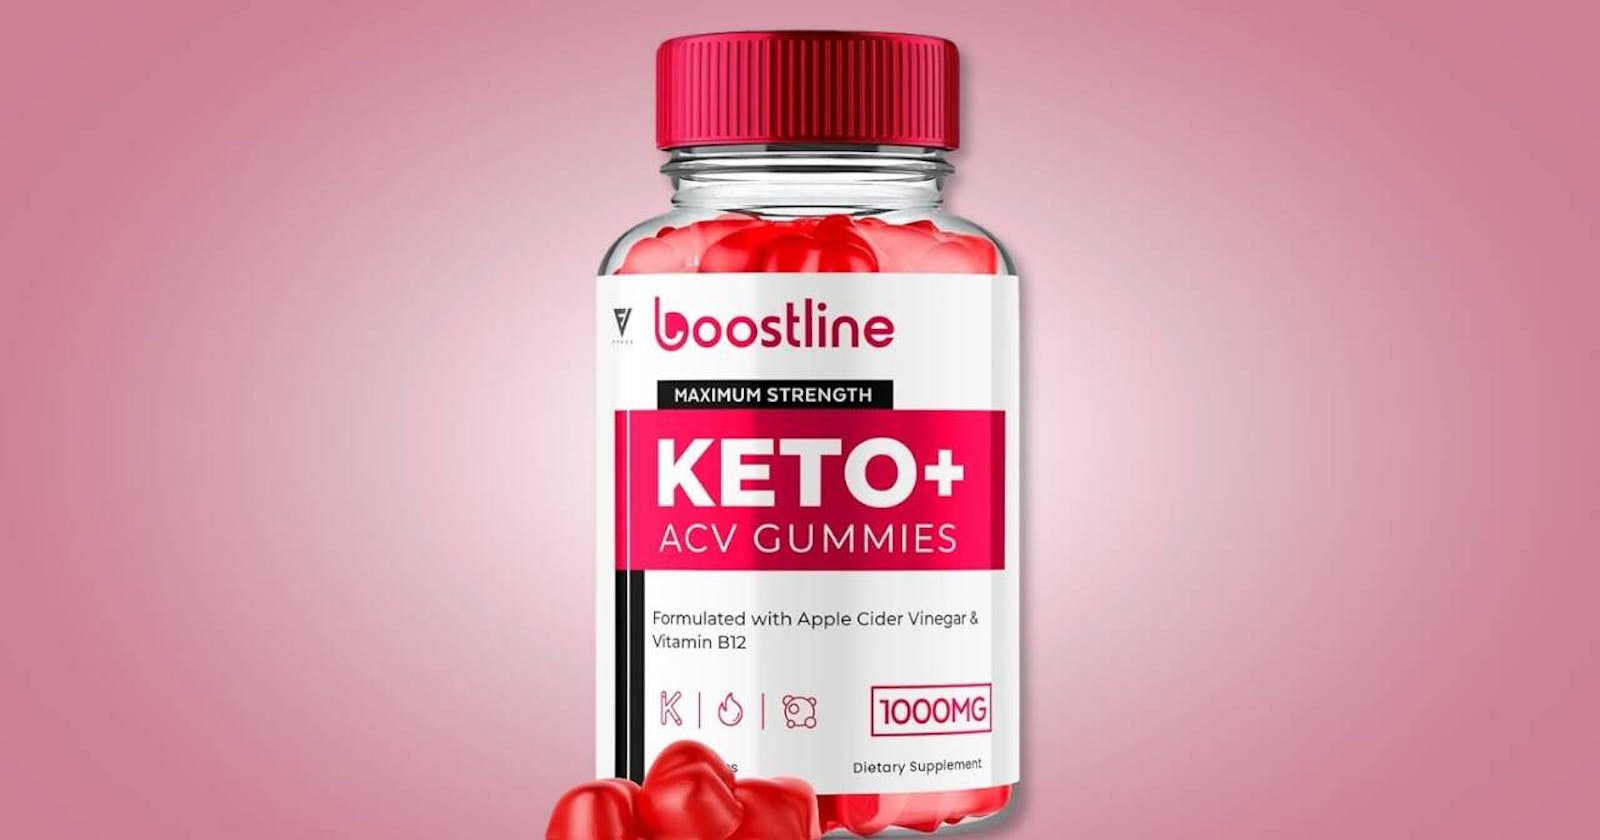 Boostline Keto ACV Gummies Official Website! Where To Buy This Product In USA?